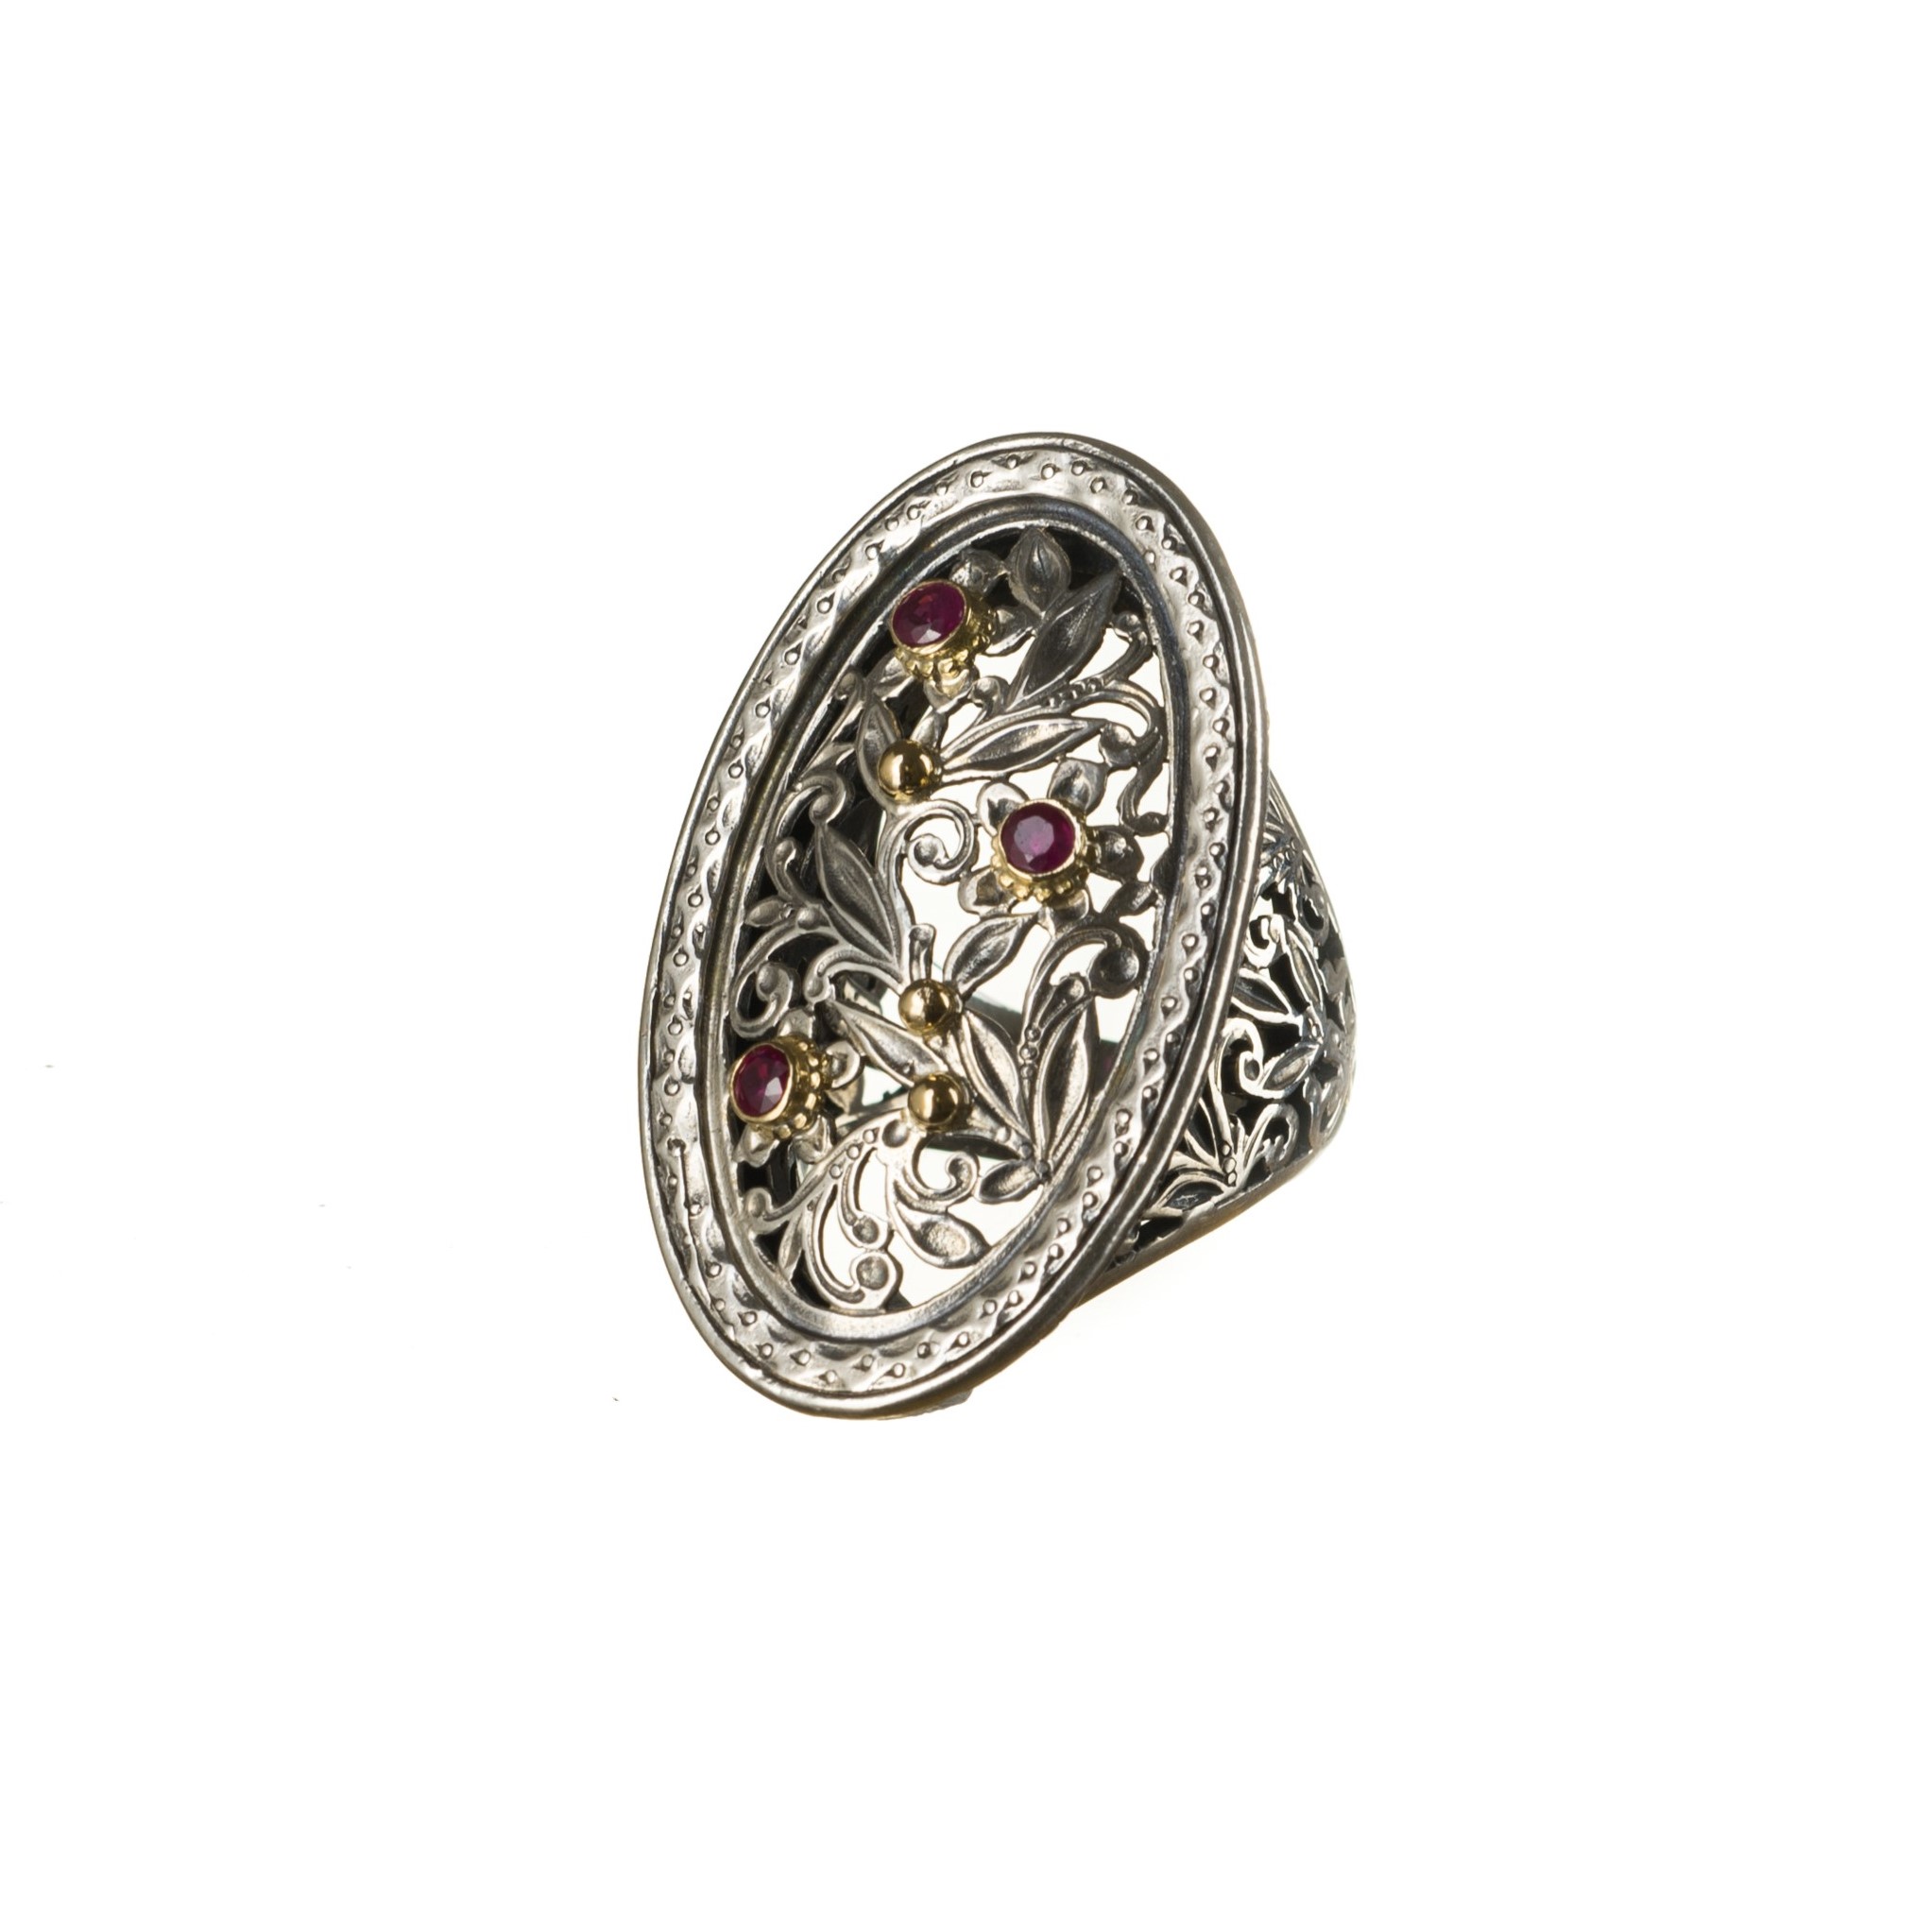 Garden shadows big oval Ring in 18K Gold and Sterling Silver with rubies